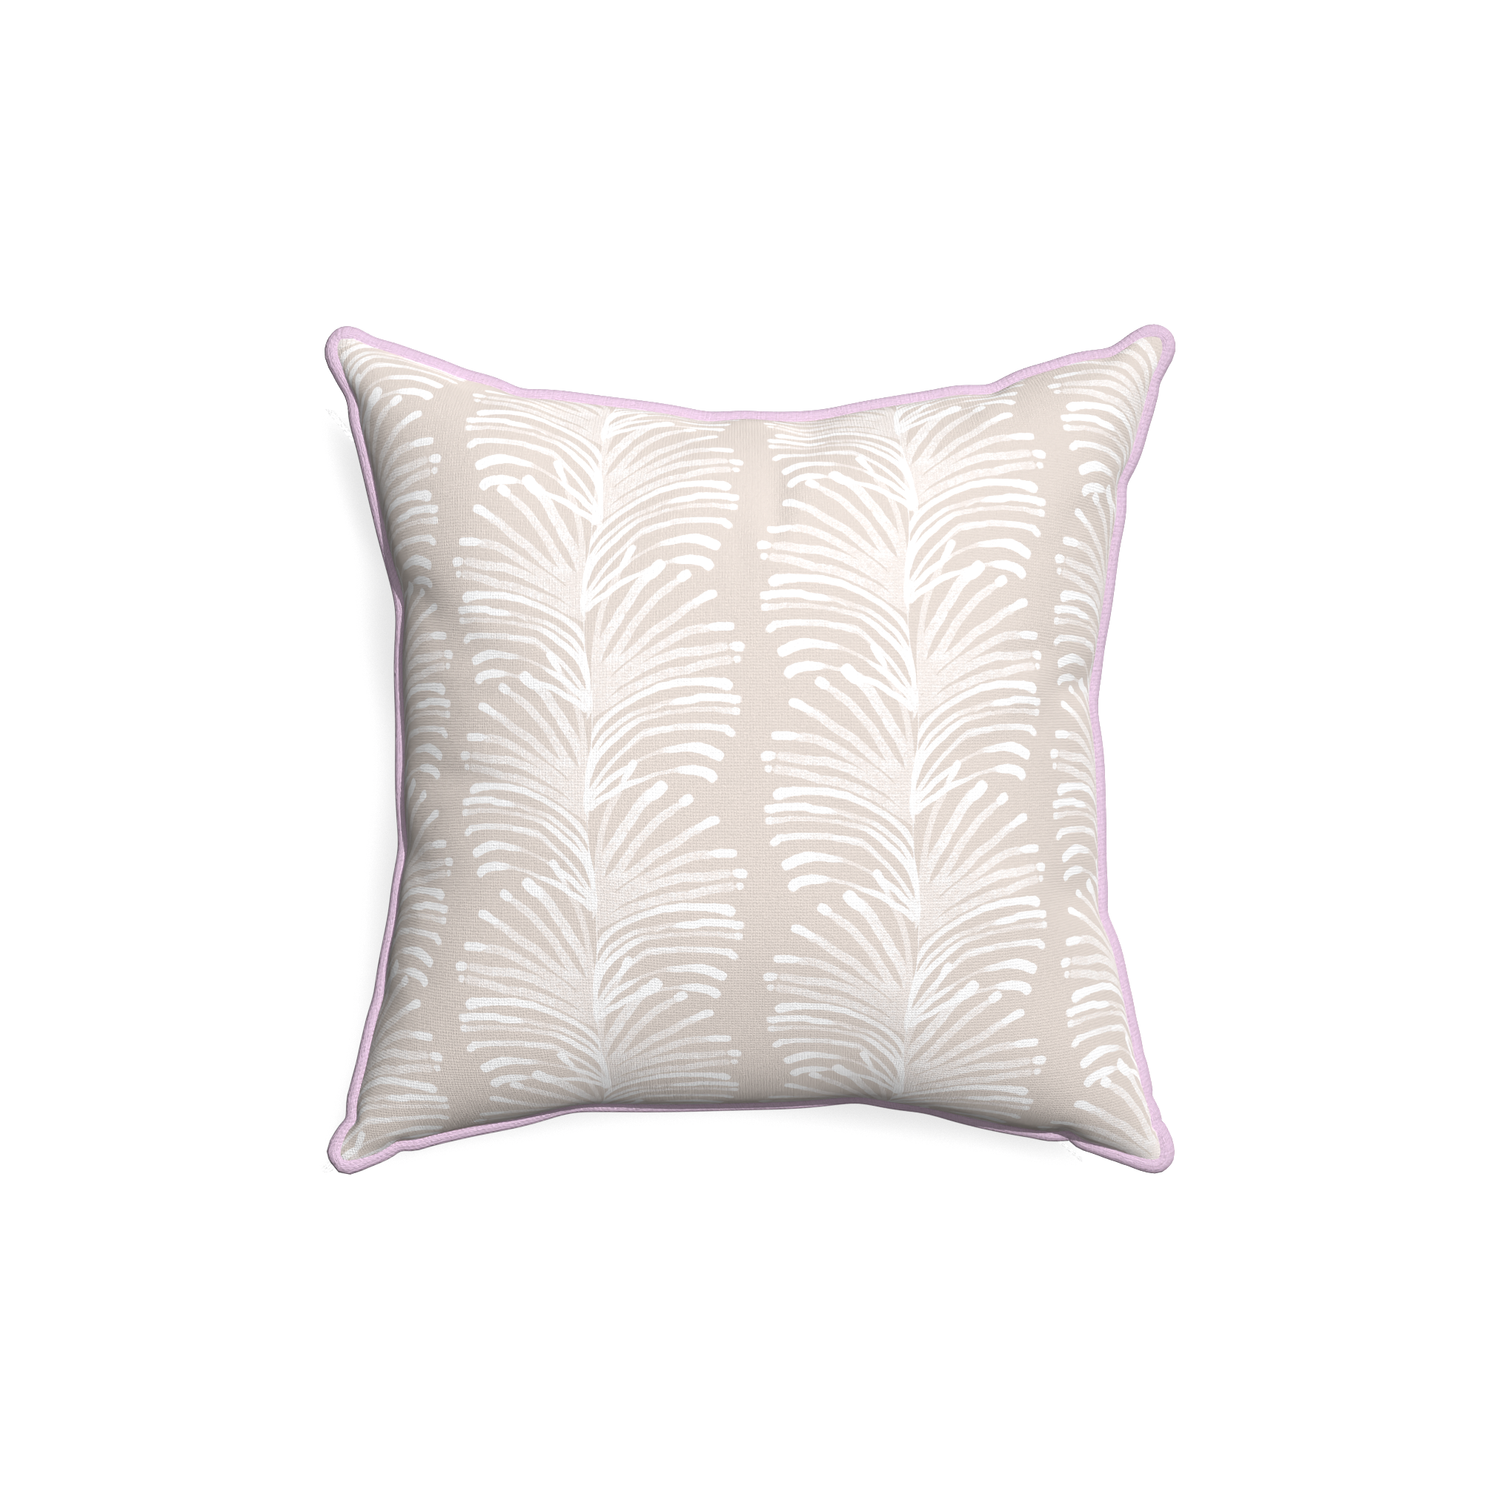 18-square emma sand custom sand colored botanical stripepillow with l piping on white background